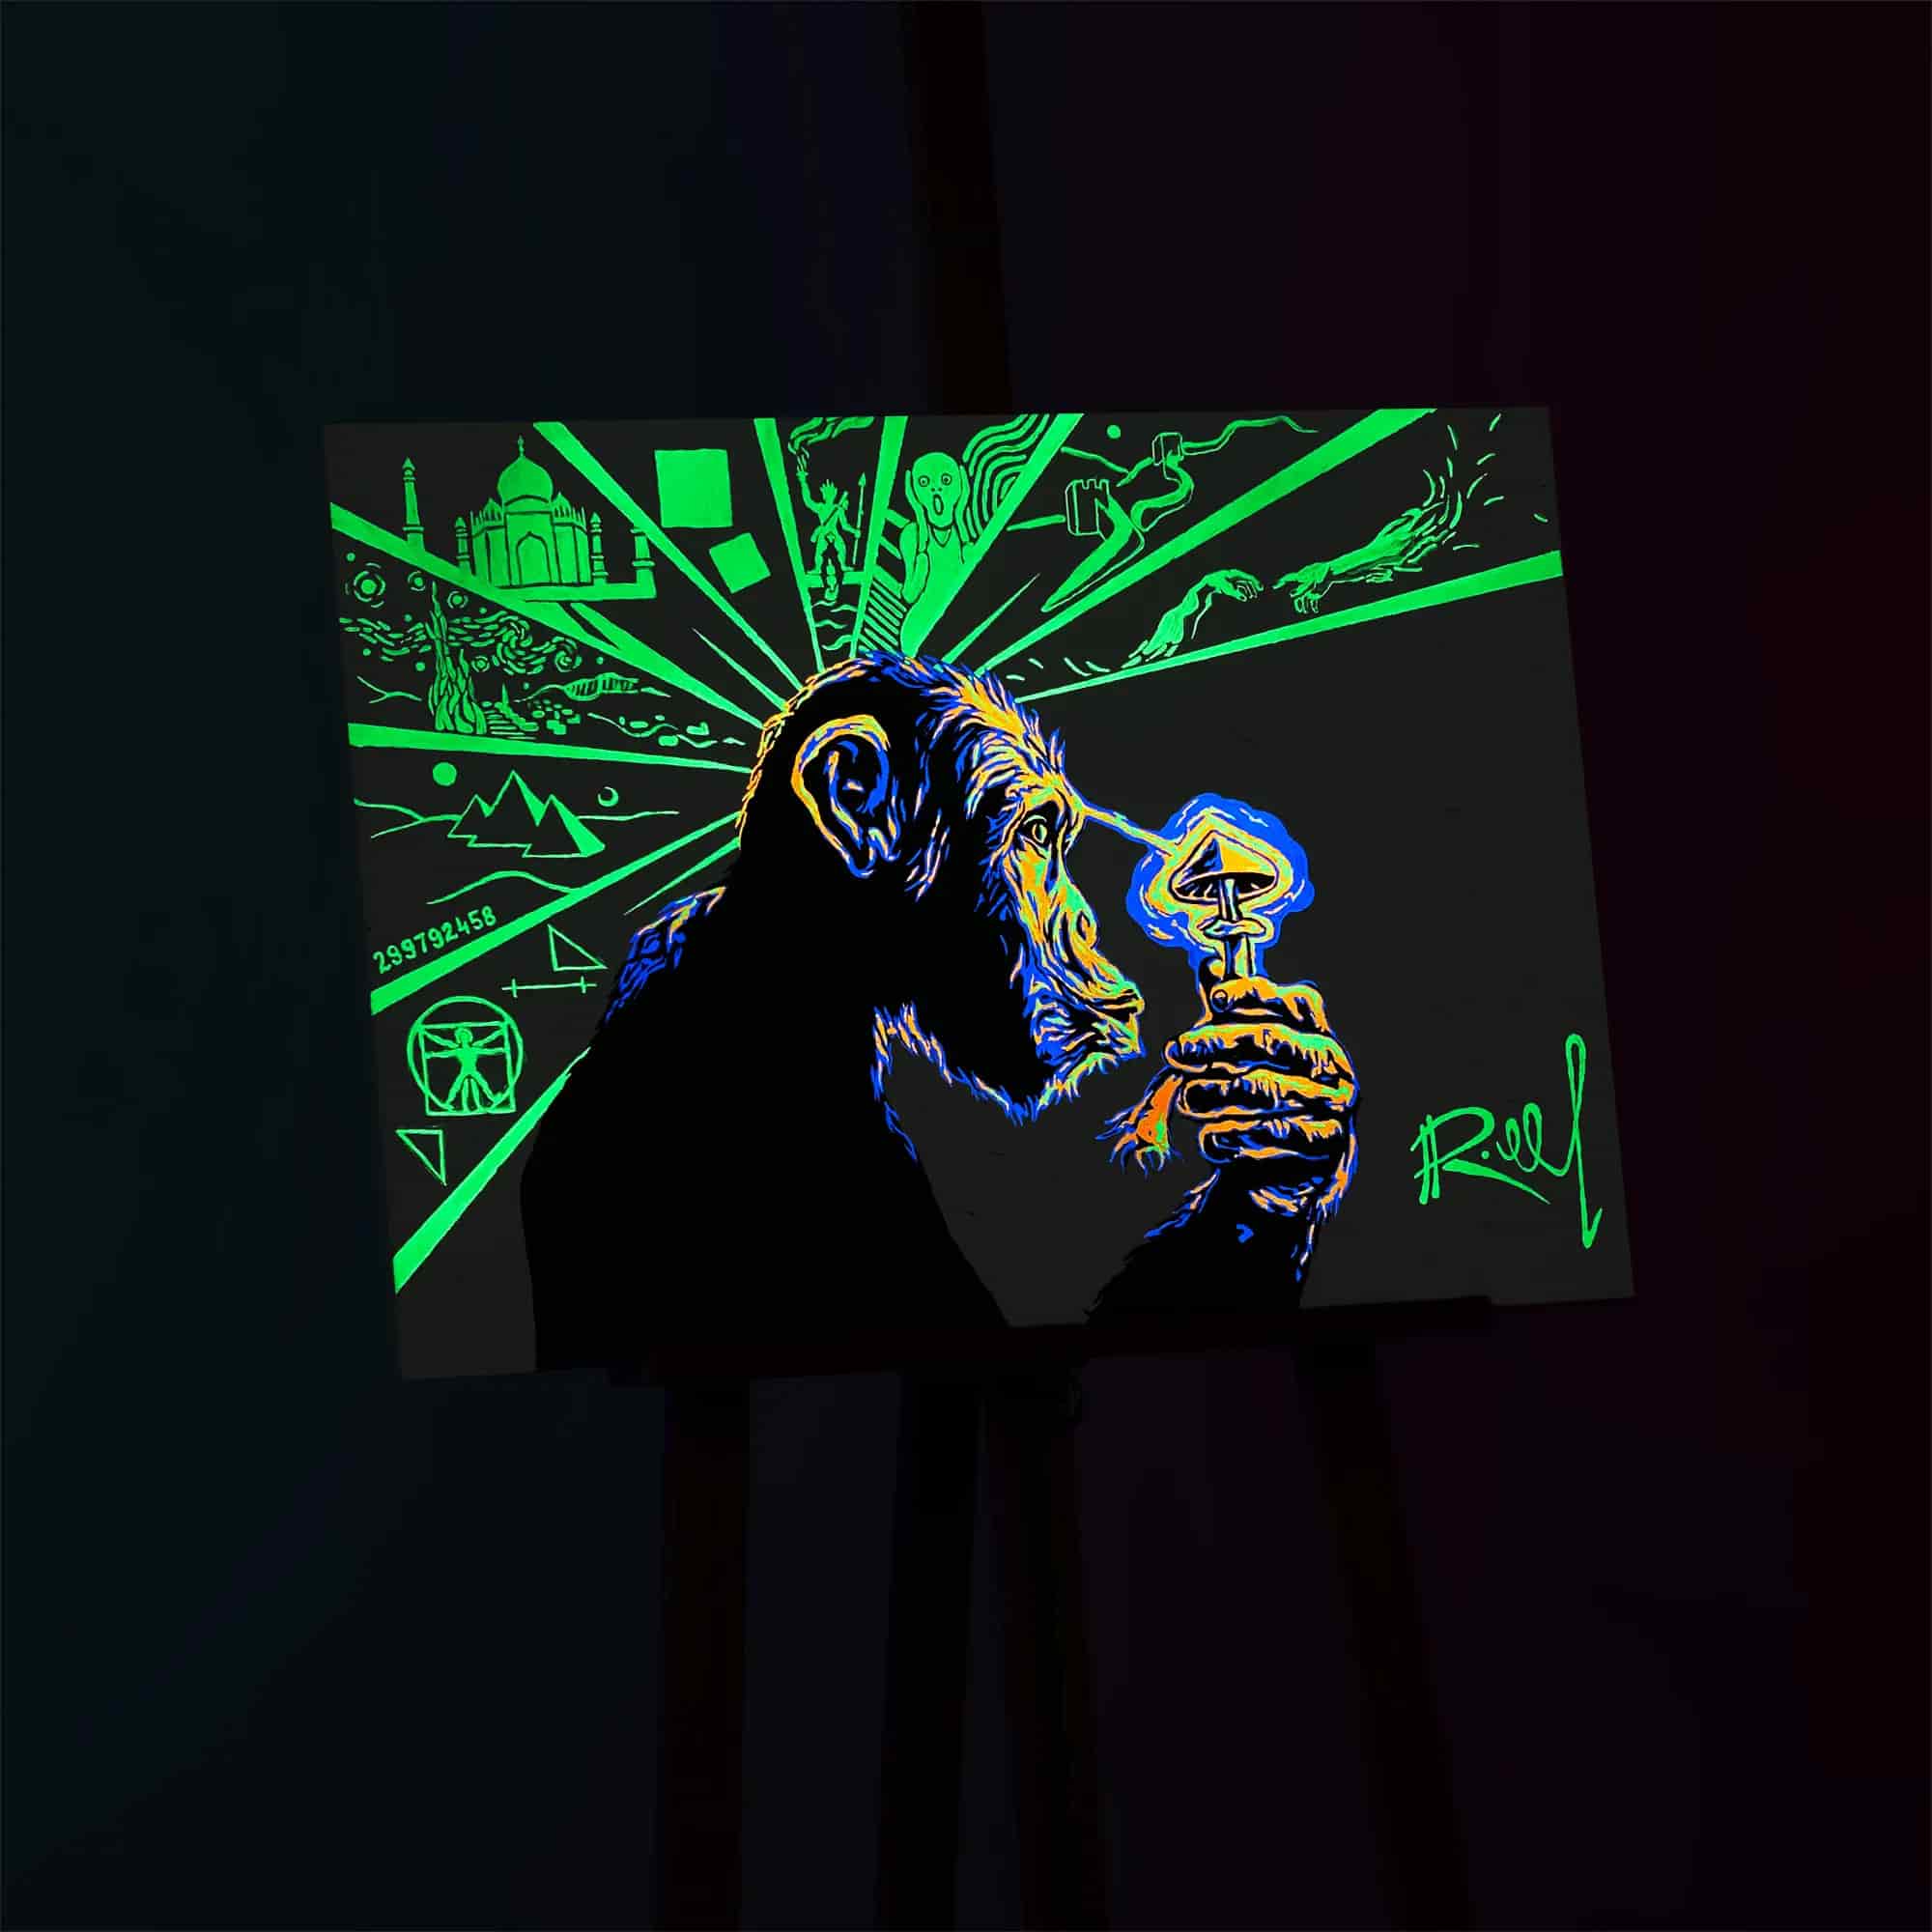 Nighttime Effect of Stoned Ape portrait - Retro glow poster with mesmerizing glow in the dark aesthetics.